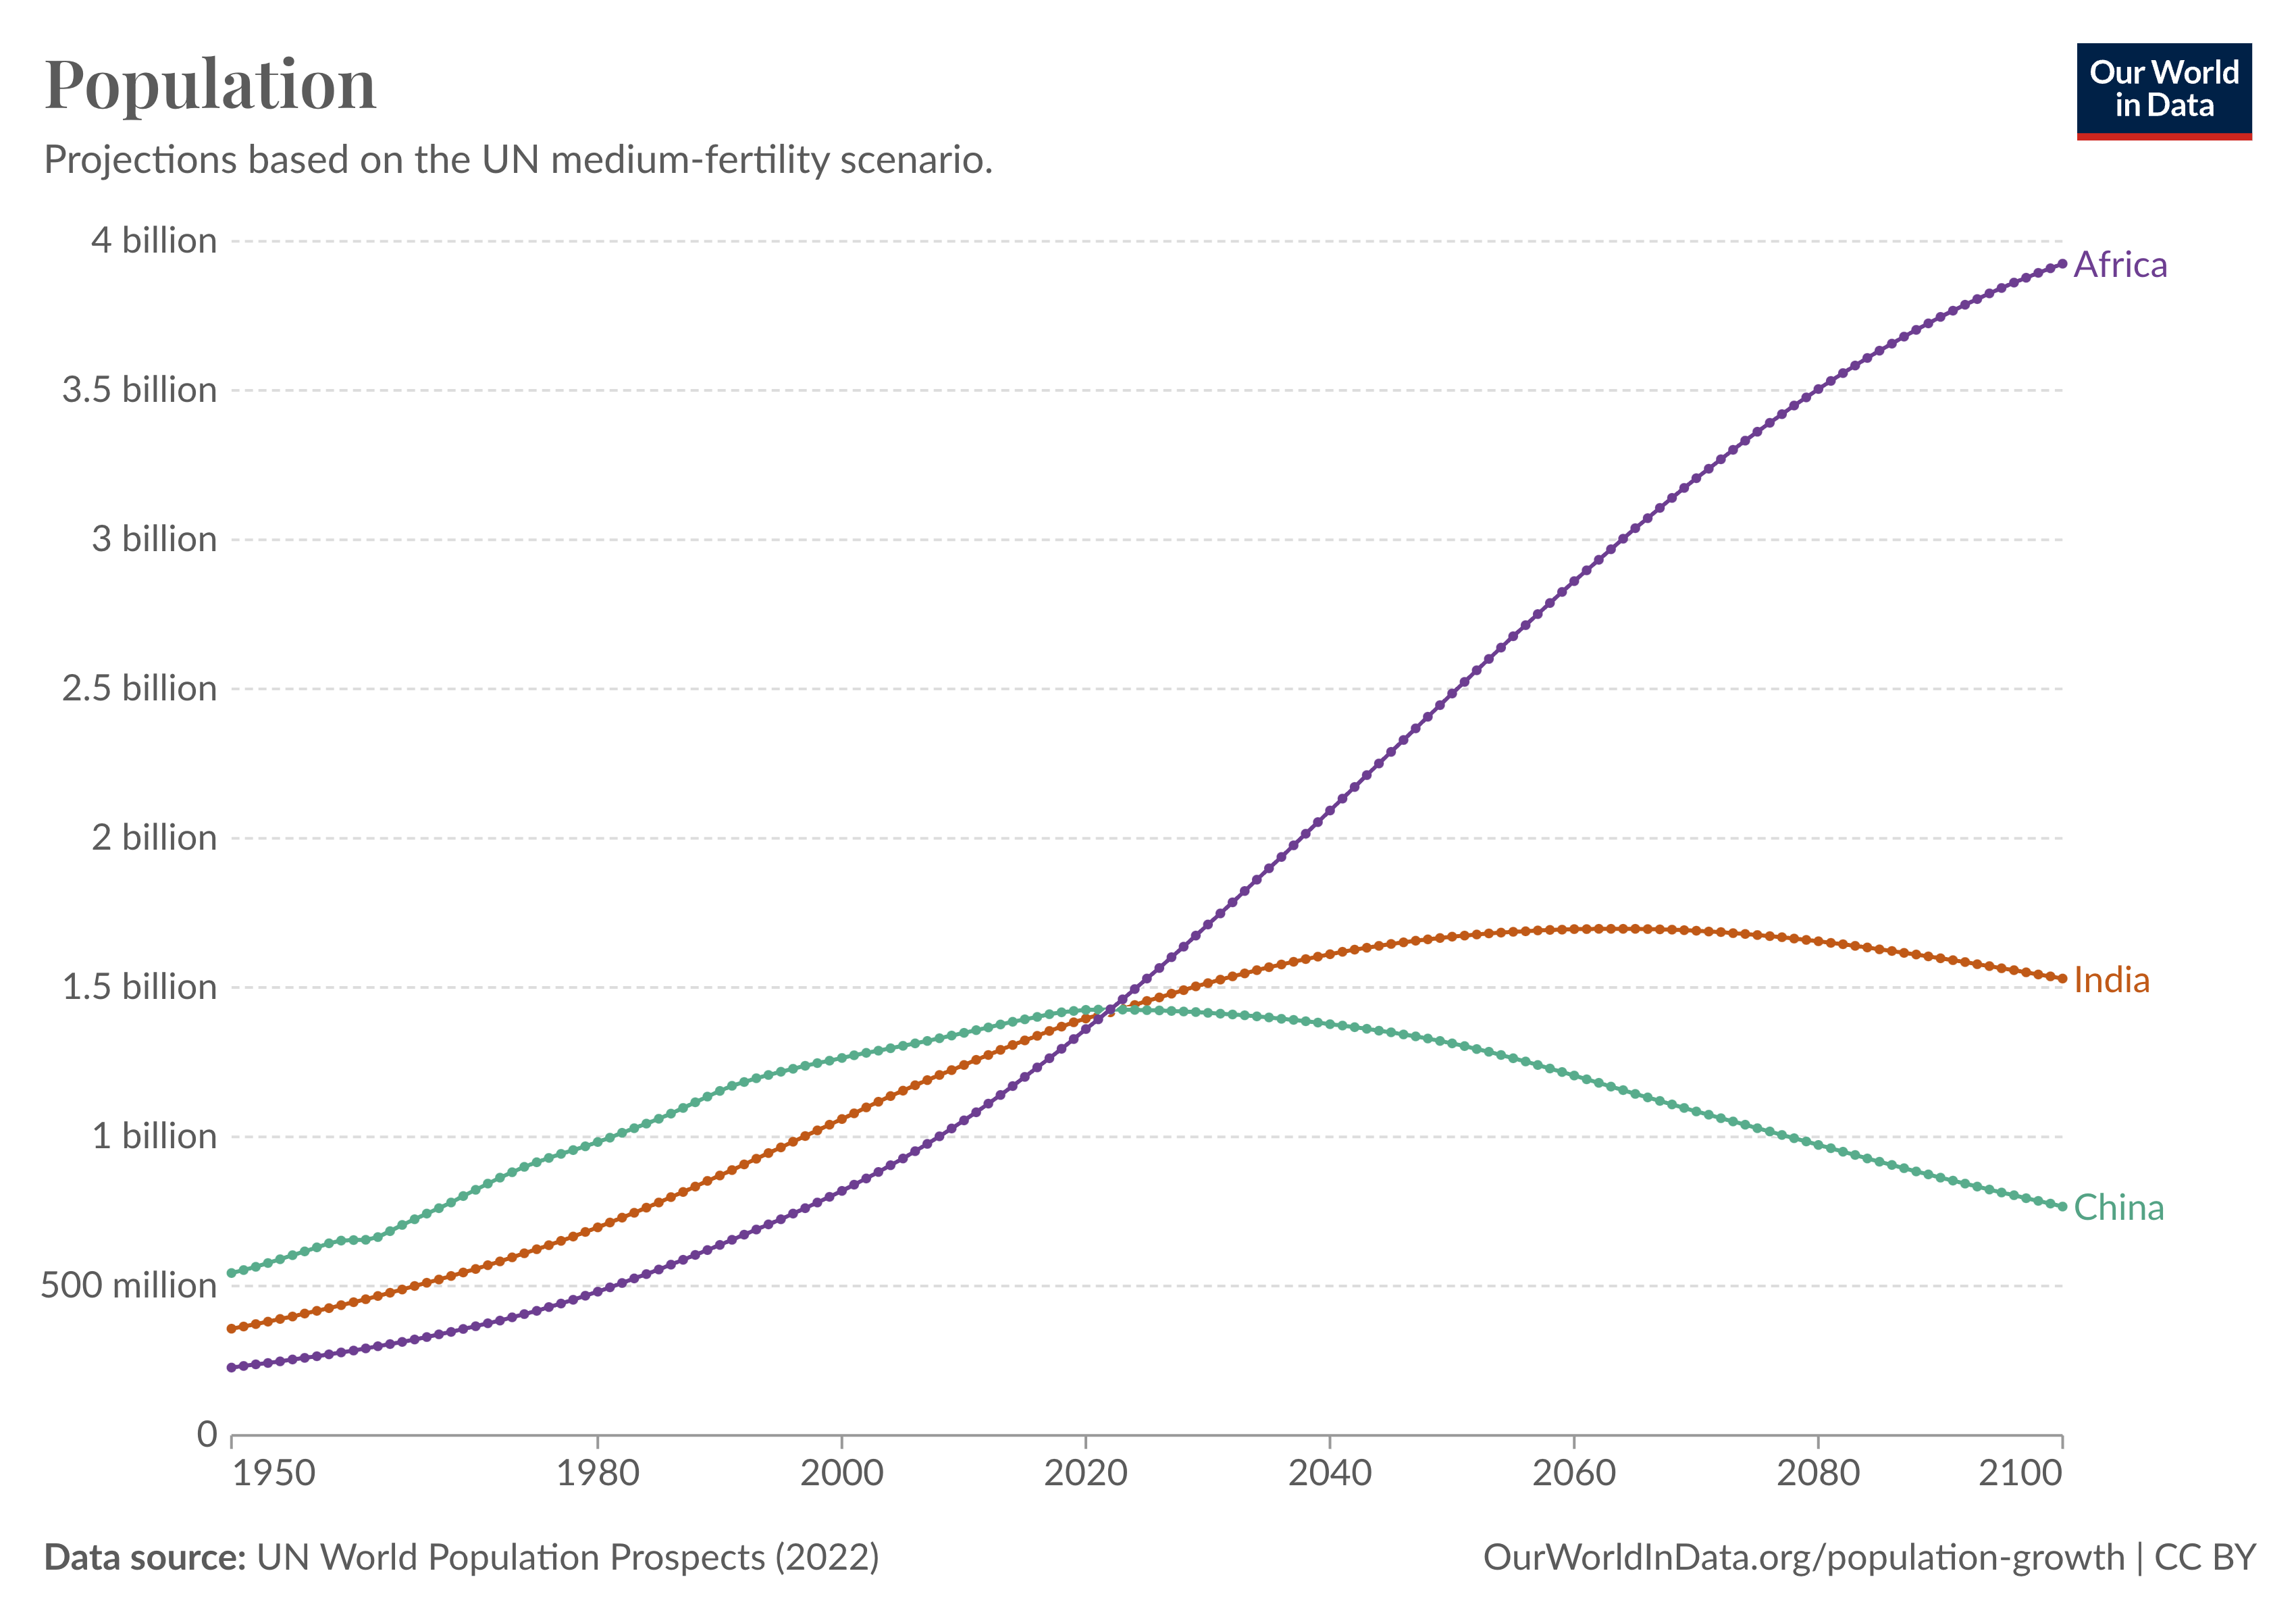 Line chart showing the population trends for Africa, China, India